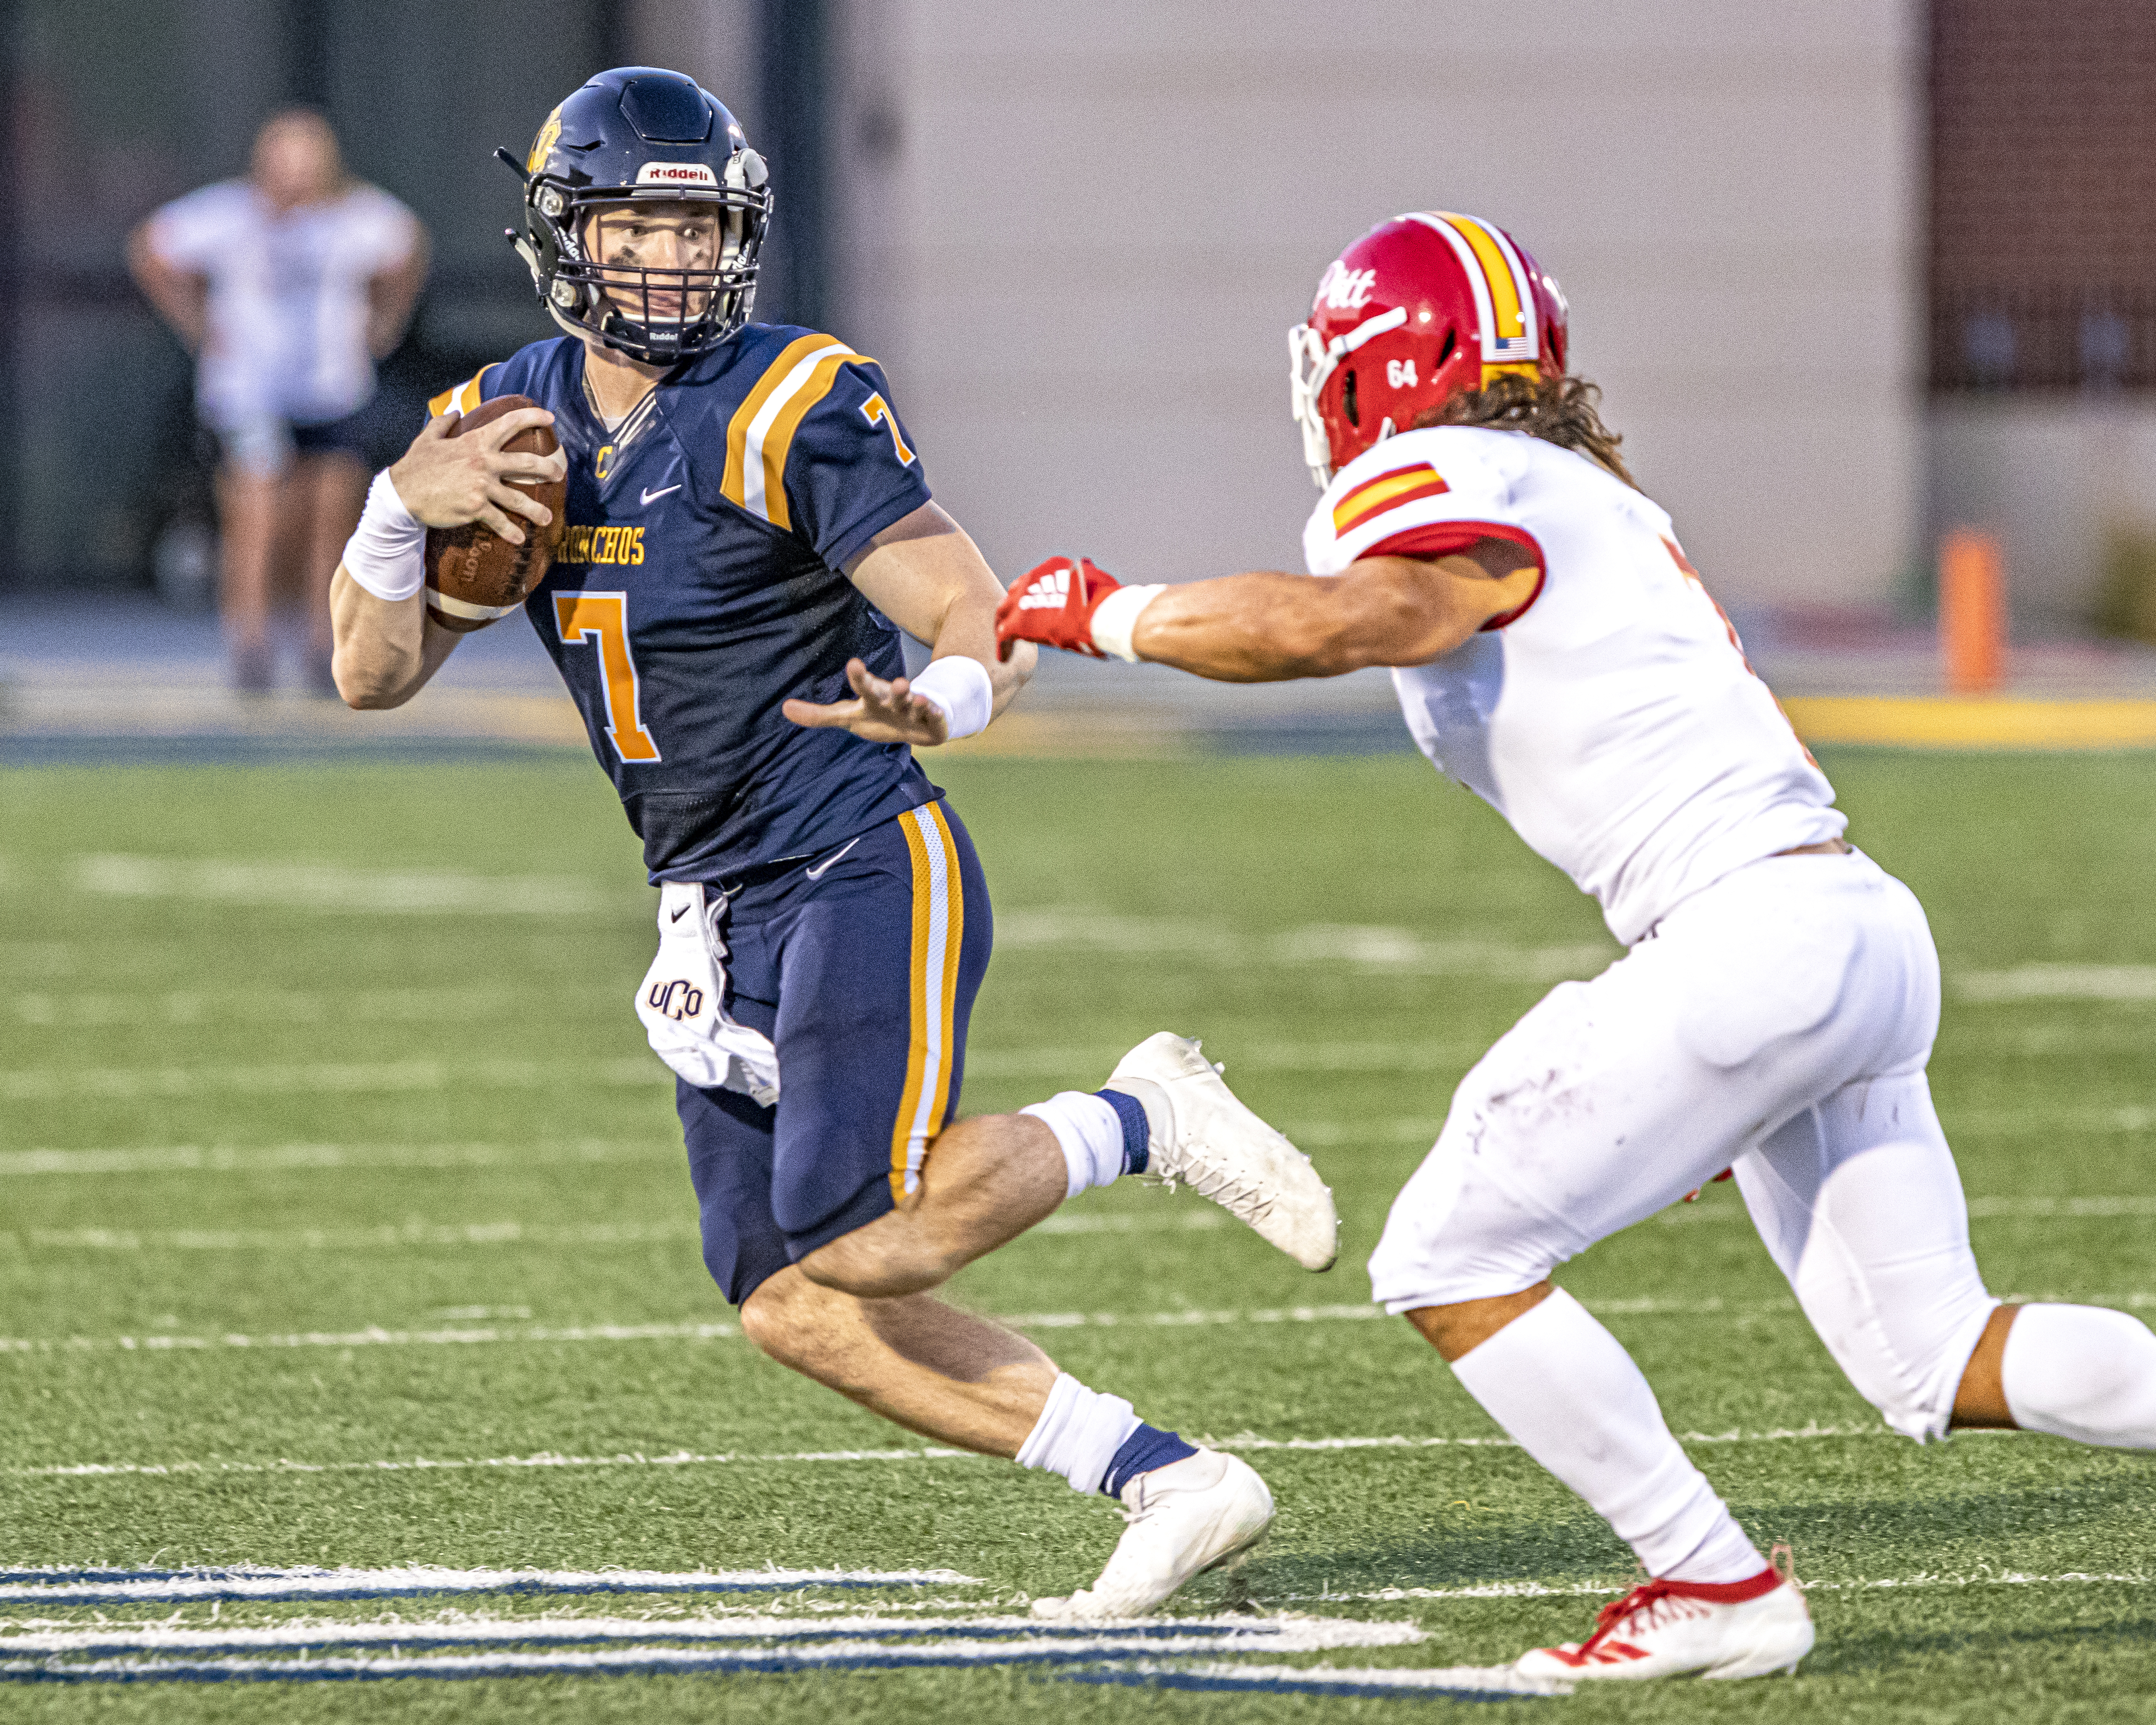 UCO 28 Point Second Half Rally Not enough to Win Season Opener